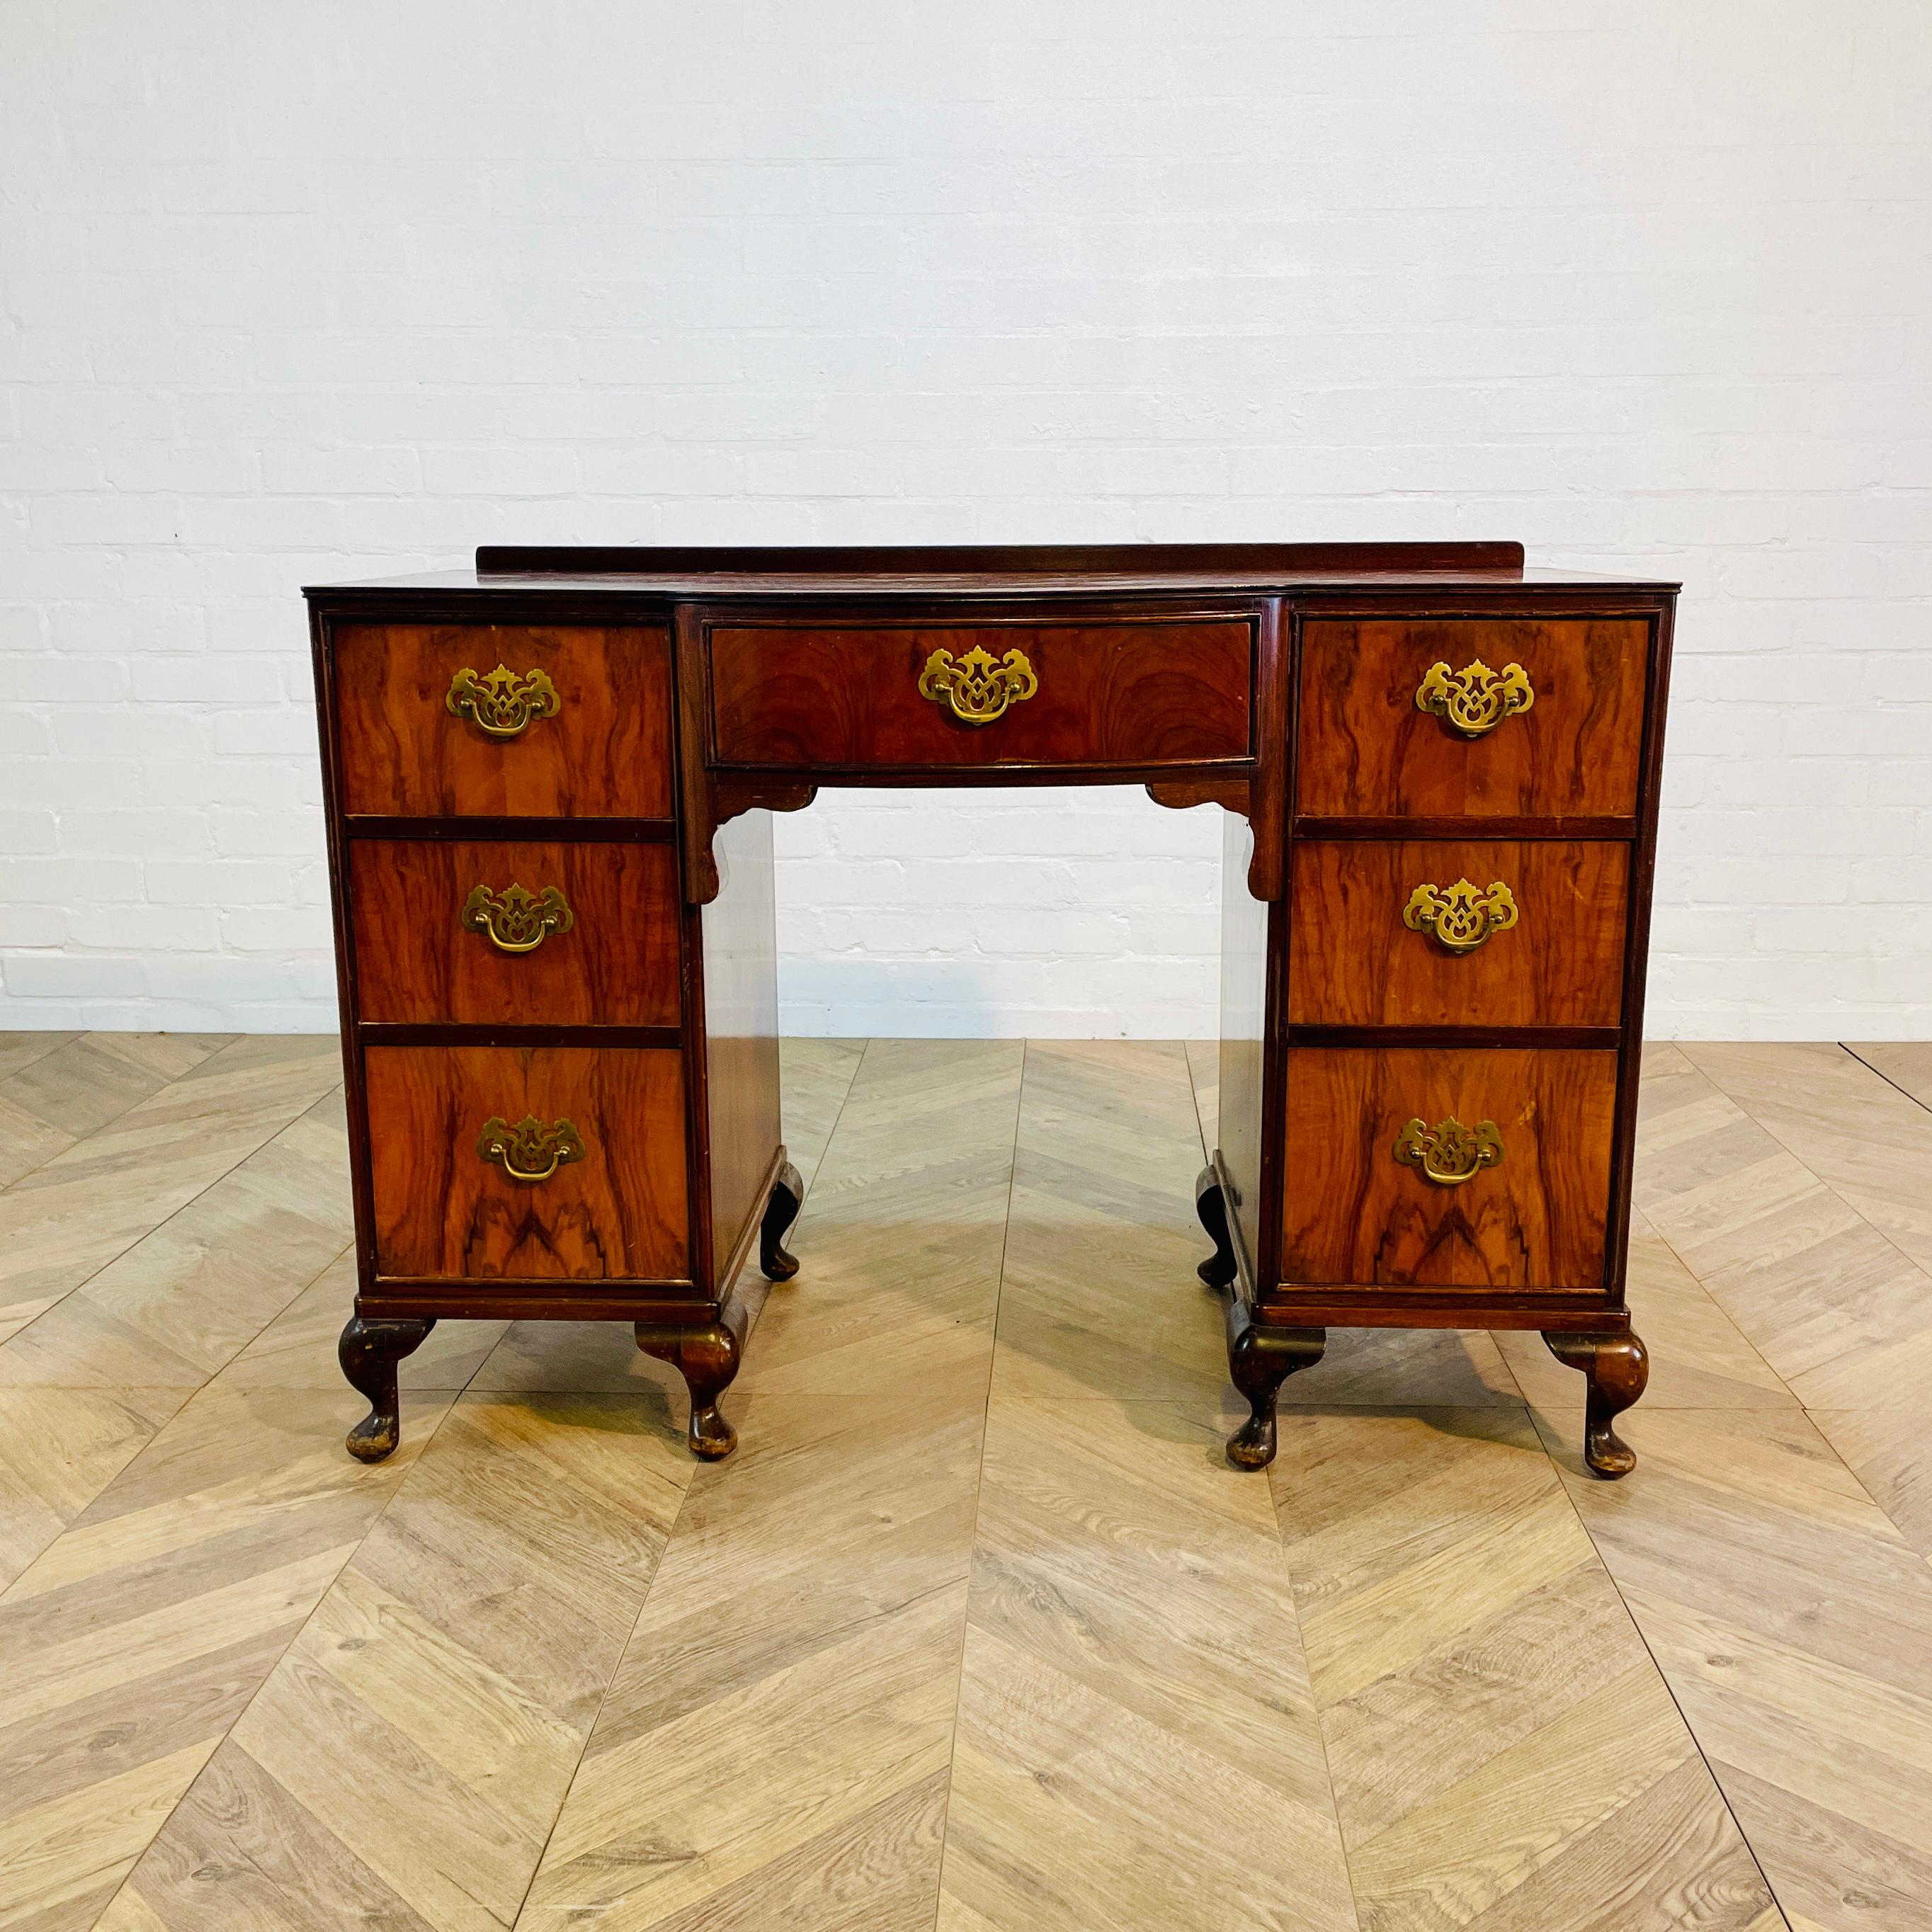 A Lovely Compact Vintage Desk with 7 Drawers by Renowned British Maker; Beithcraft. circa 1960s.

The desk, designed in traditional manner, is finished in walnut veneer, which is in very good vintage condition, but does have a couple of marks to the